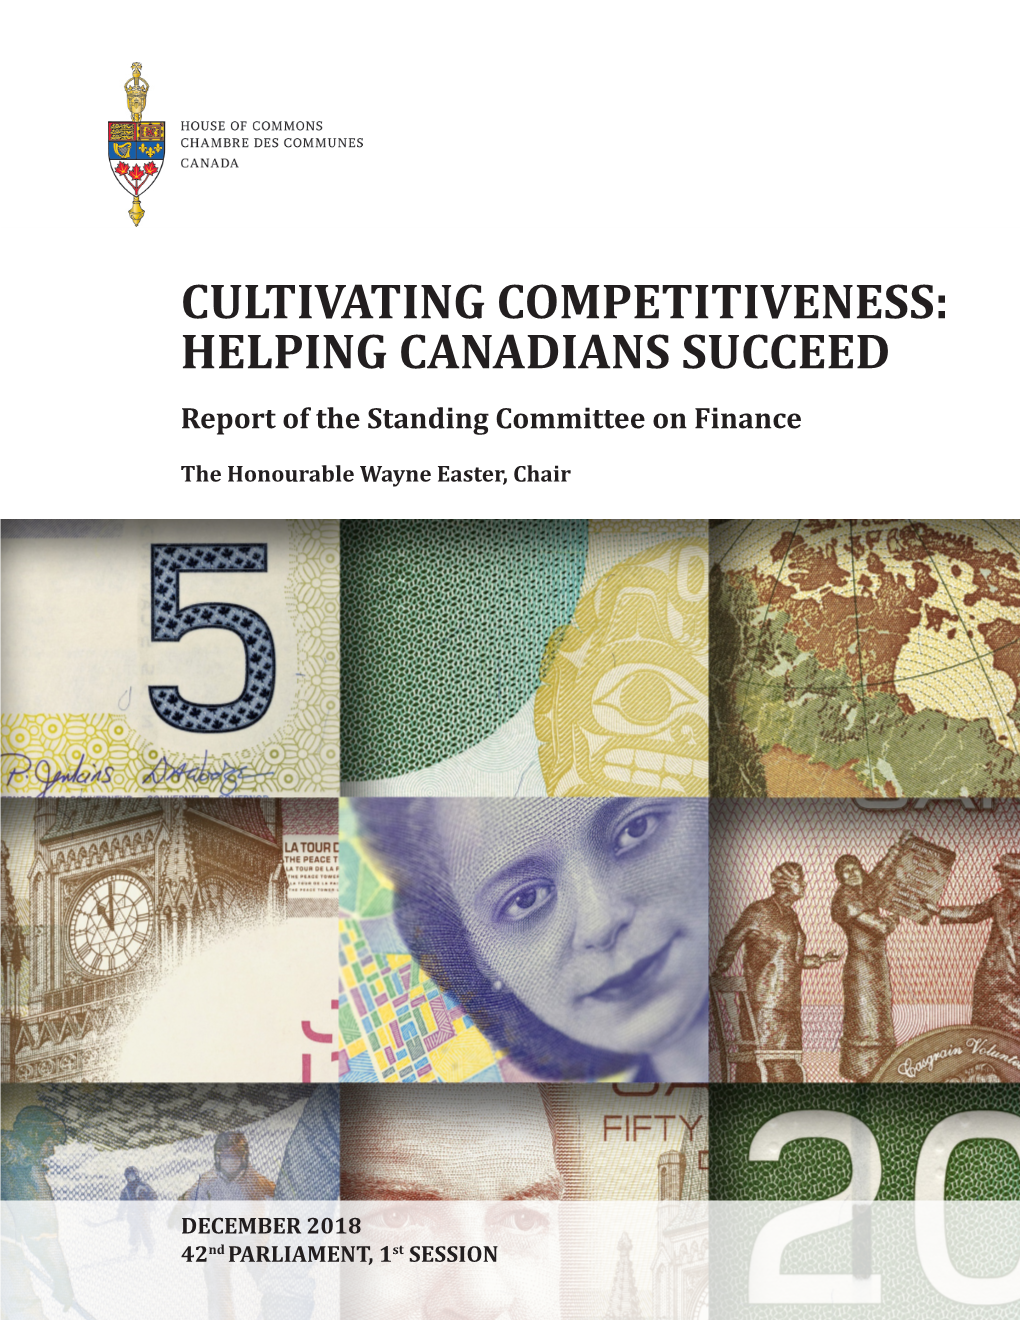 HELPING CANADIANS SUCCEED Report of the Standing Committee on Finance